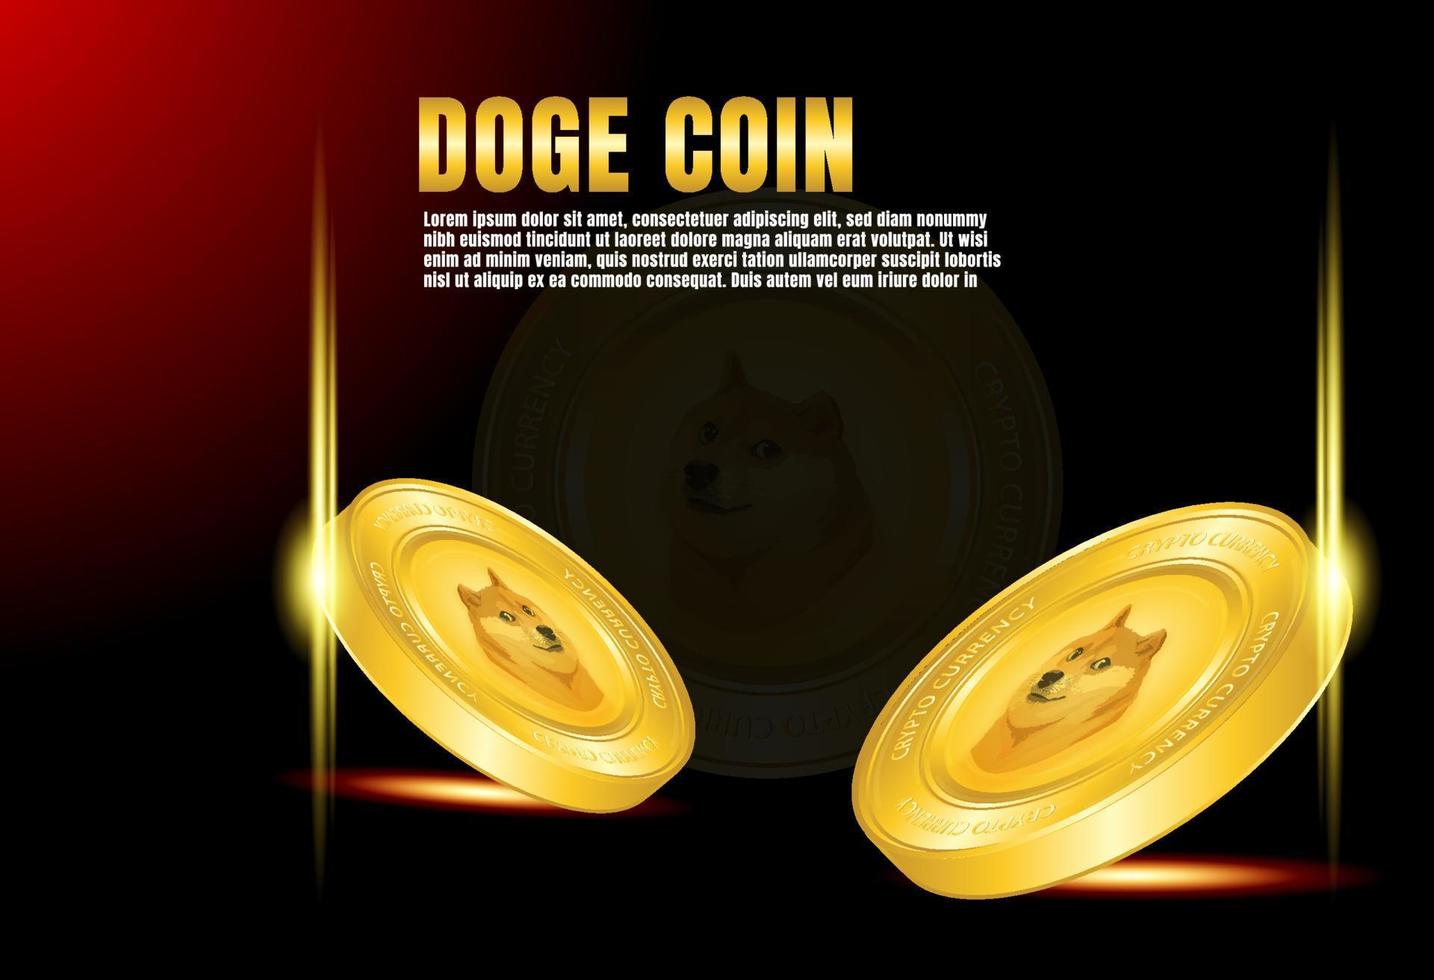 doge coin  cryptocurrency flying illustration poster design vector